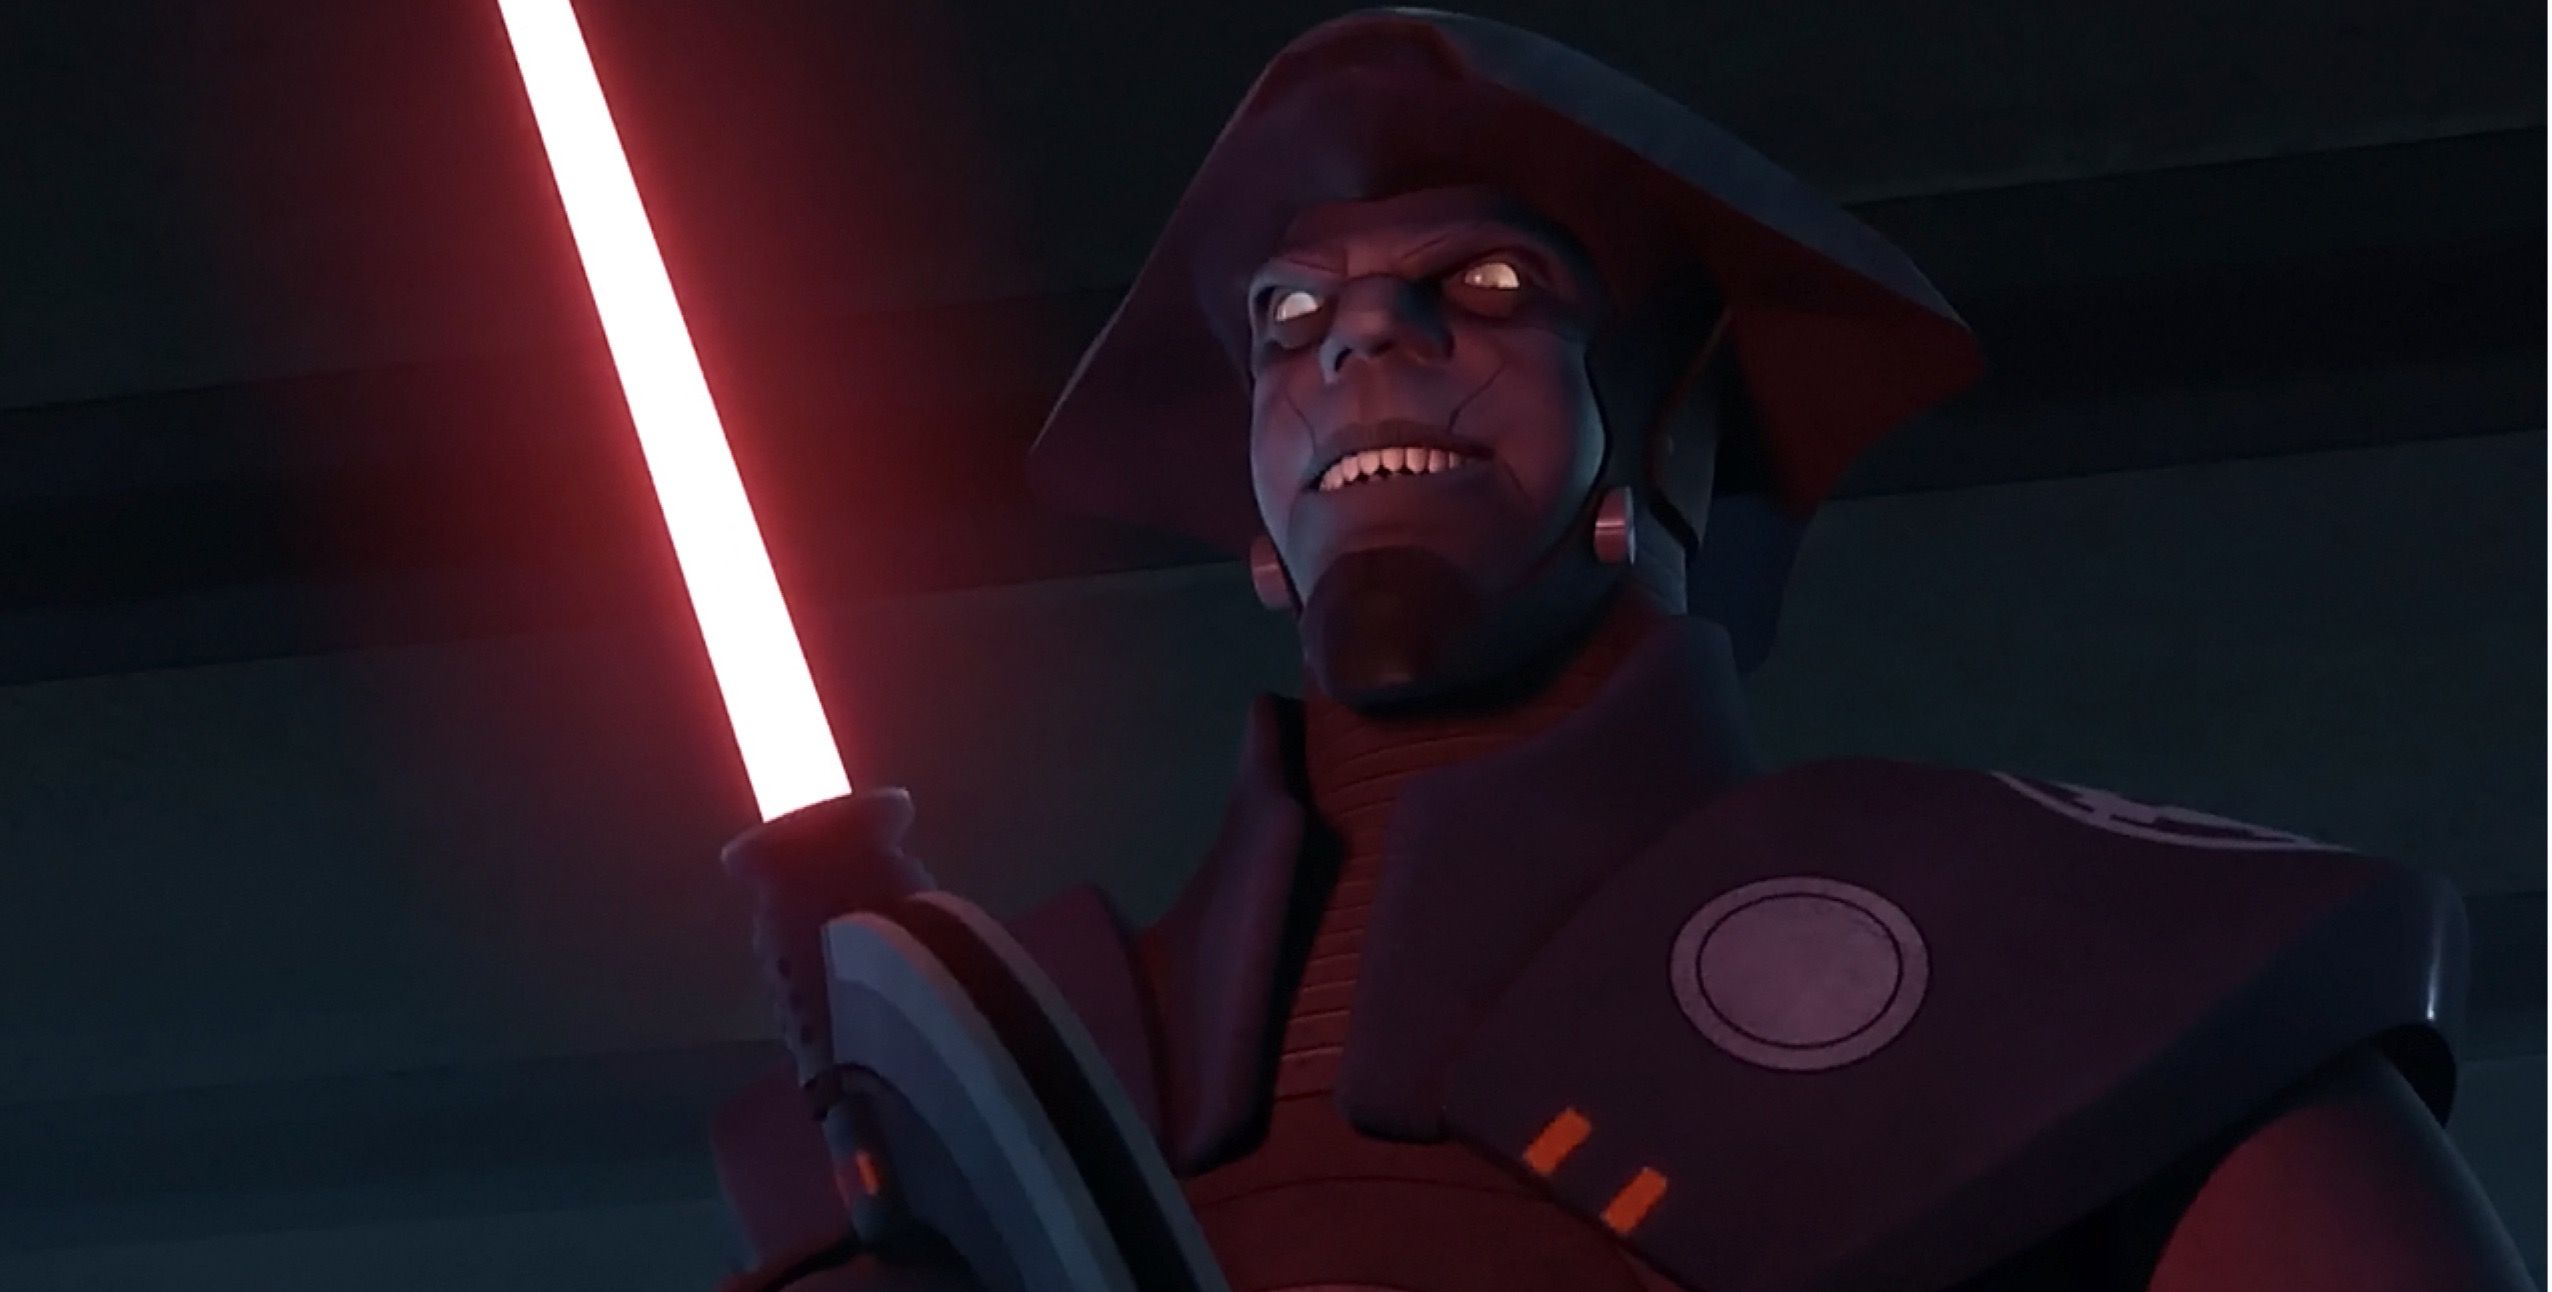 Unused Force Awakens Concept Art Used For New Rebels Character